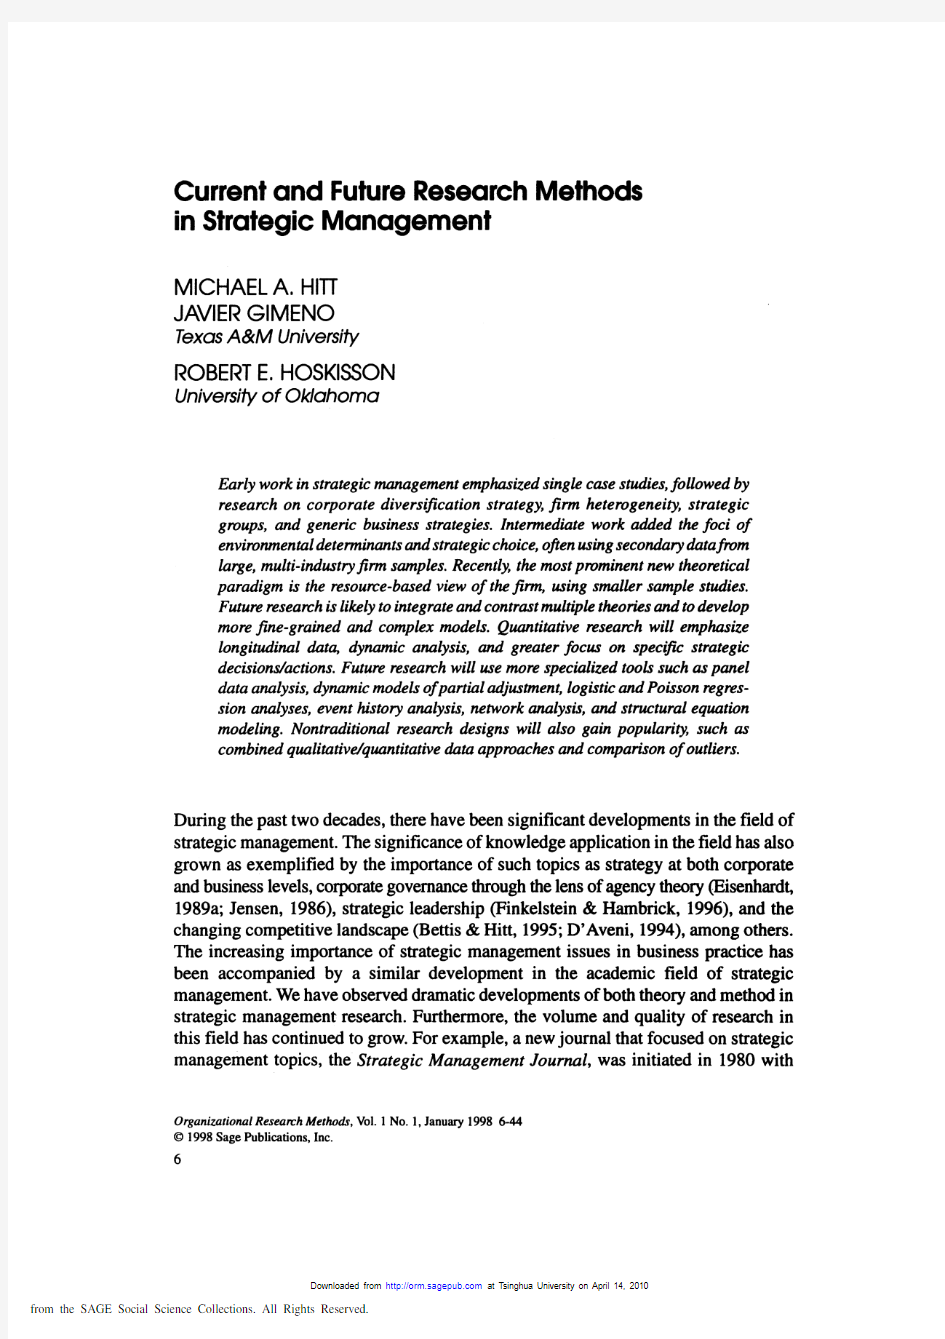 2-Current and Future Research Methods in Strategic Management